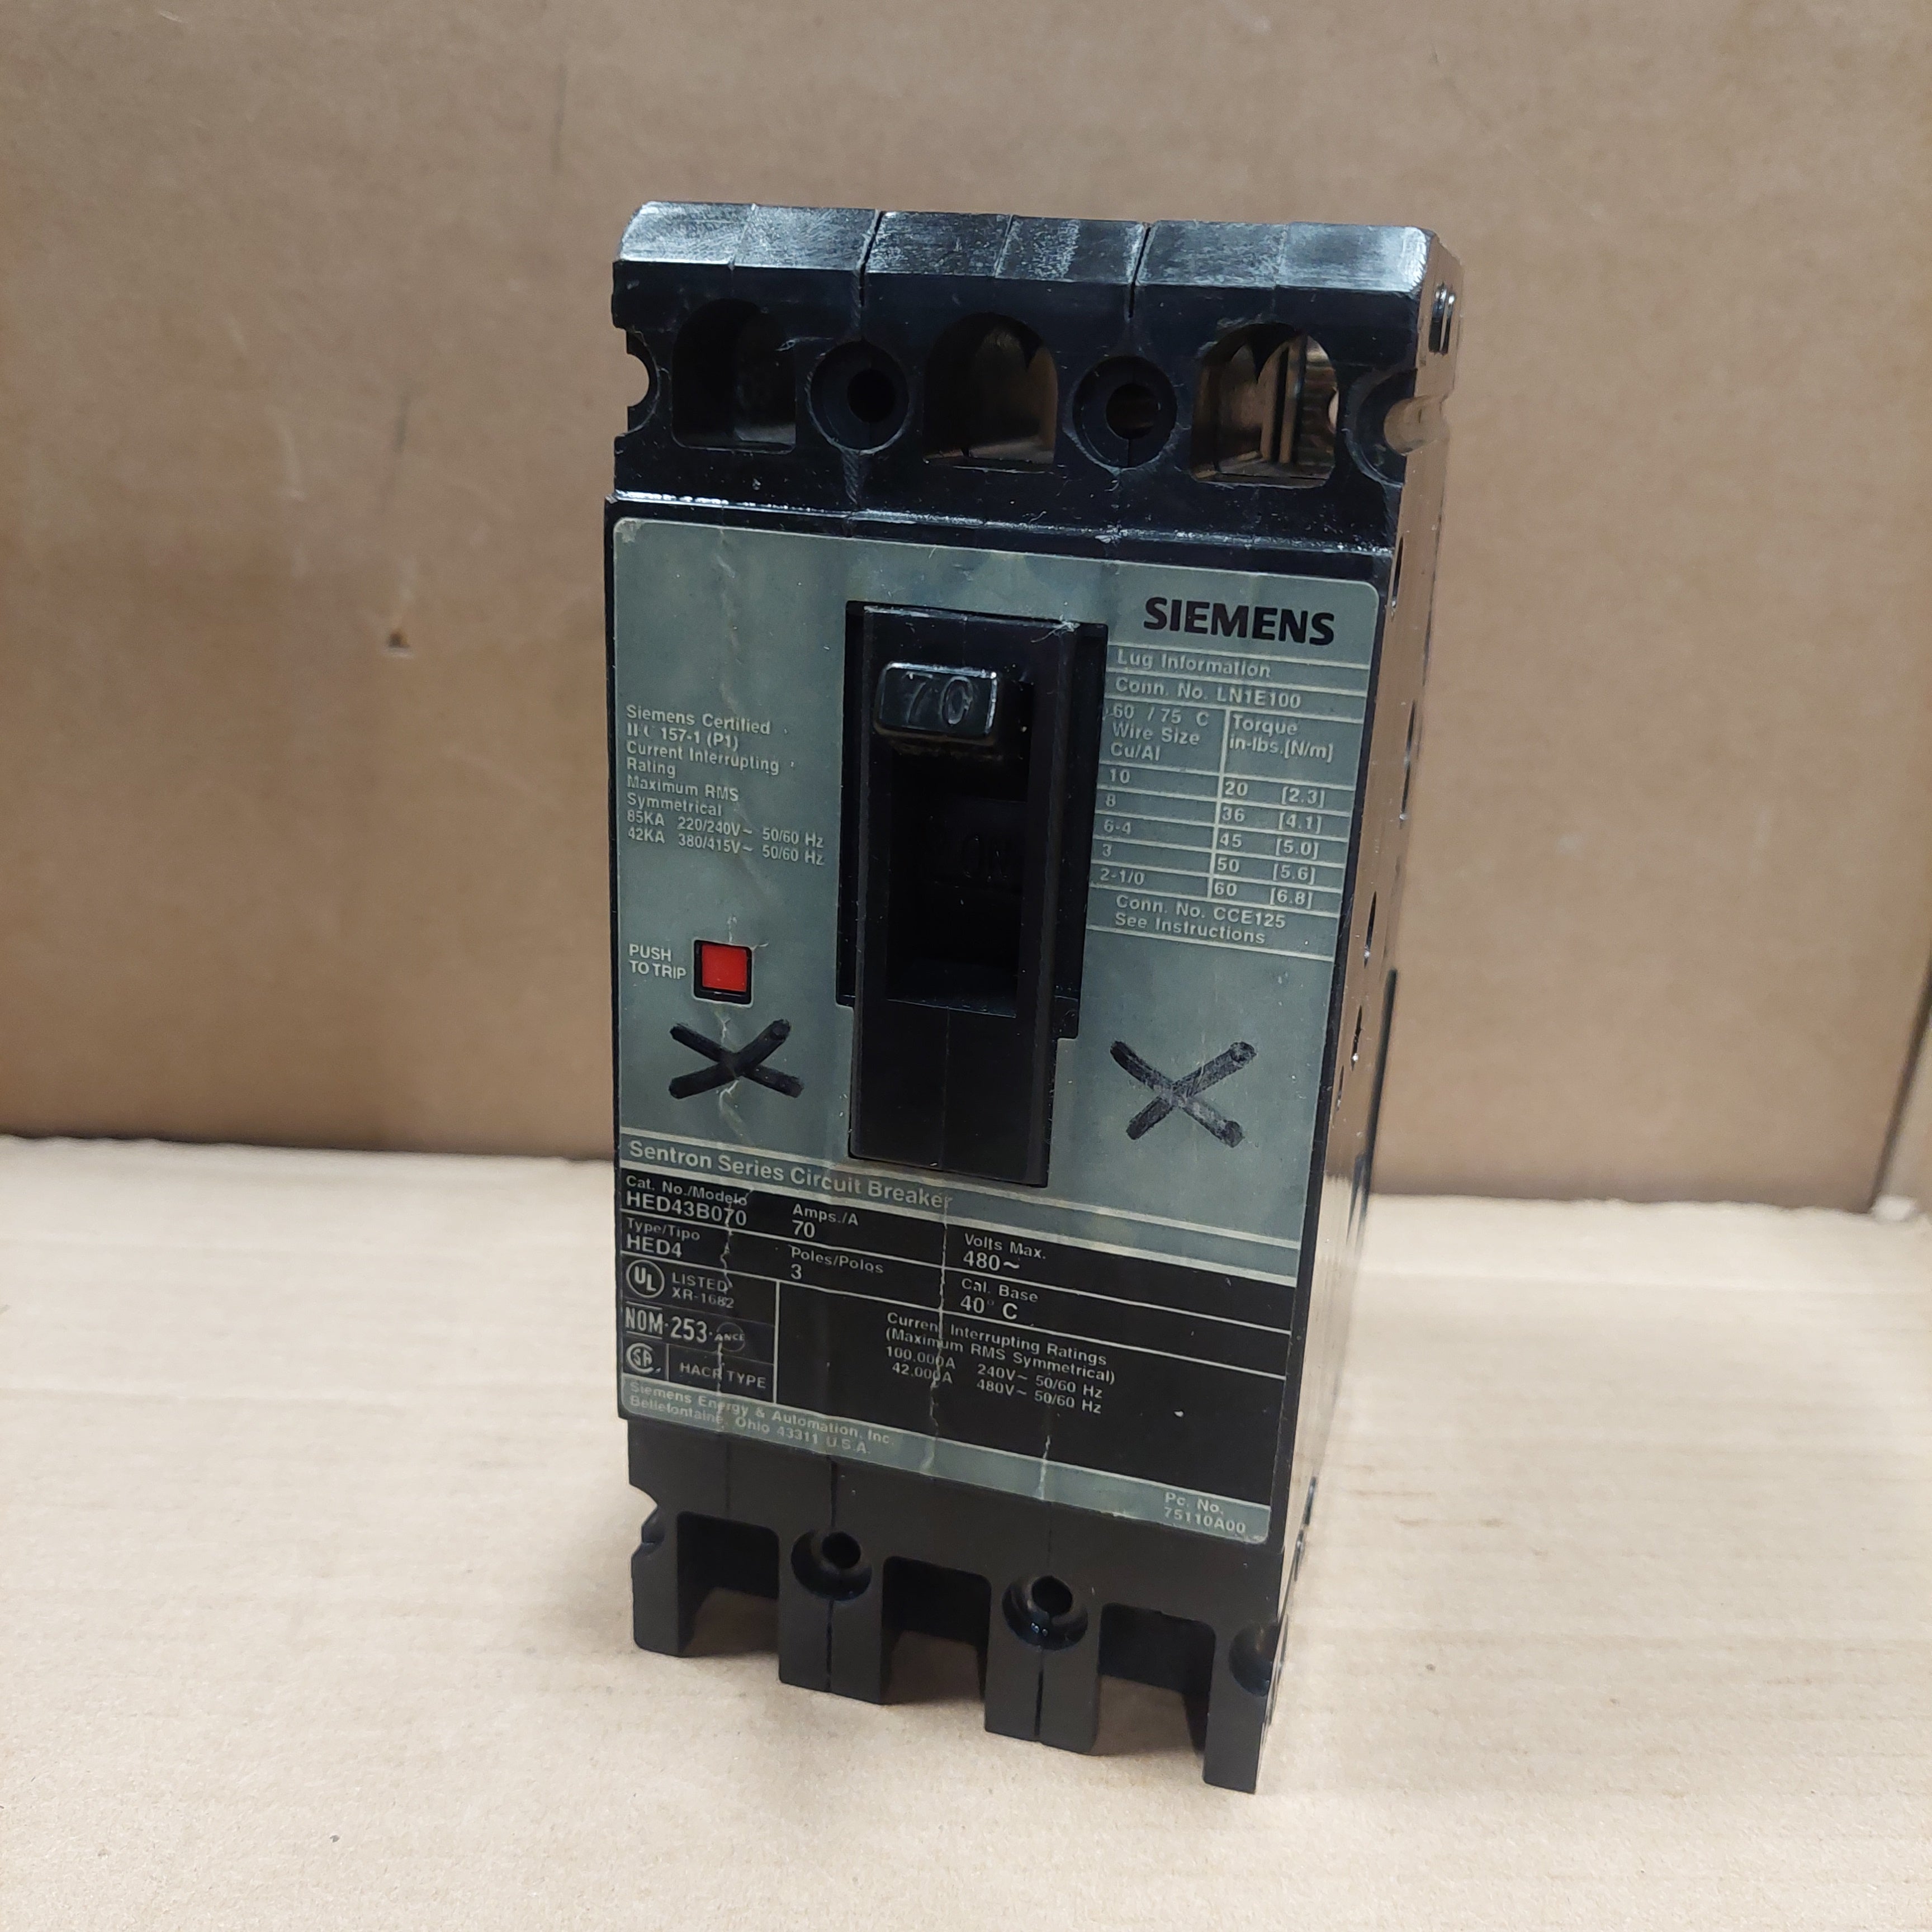 Siemens HED43B070 70A Circuit Breaker 3 Pole 480V (CRACKED CASE)(AS IS)